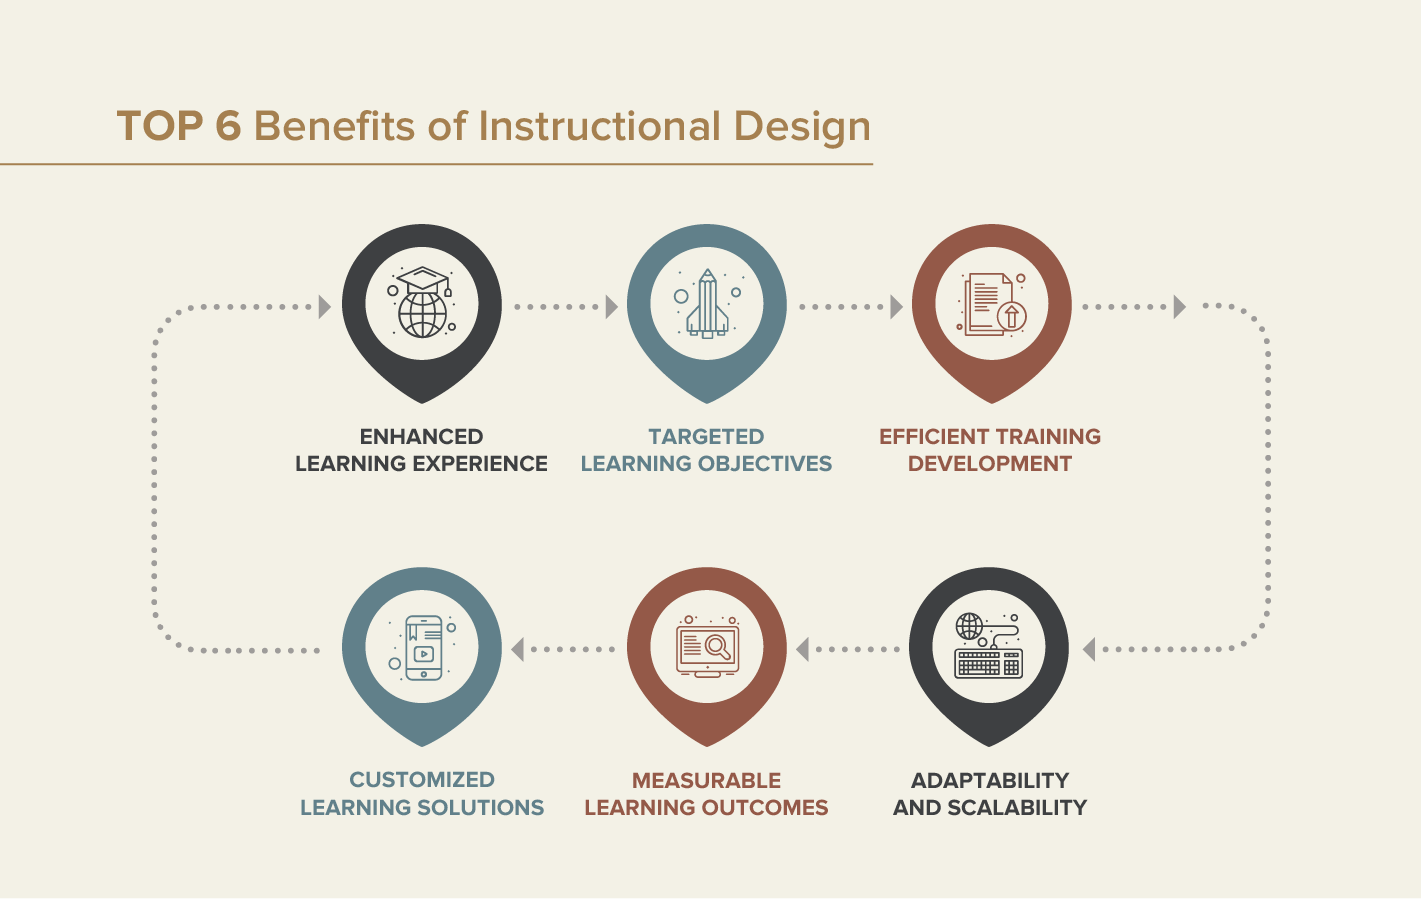 The Benefits of Instructional Design